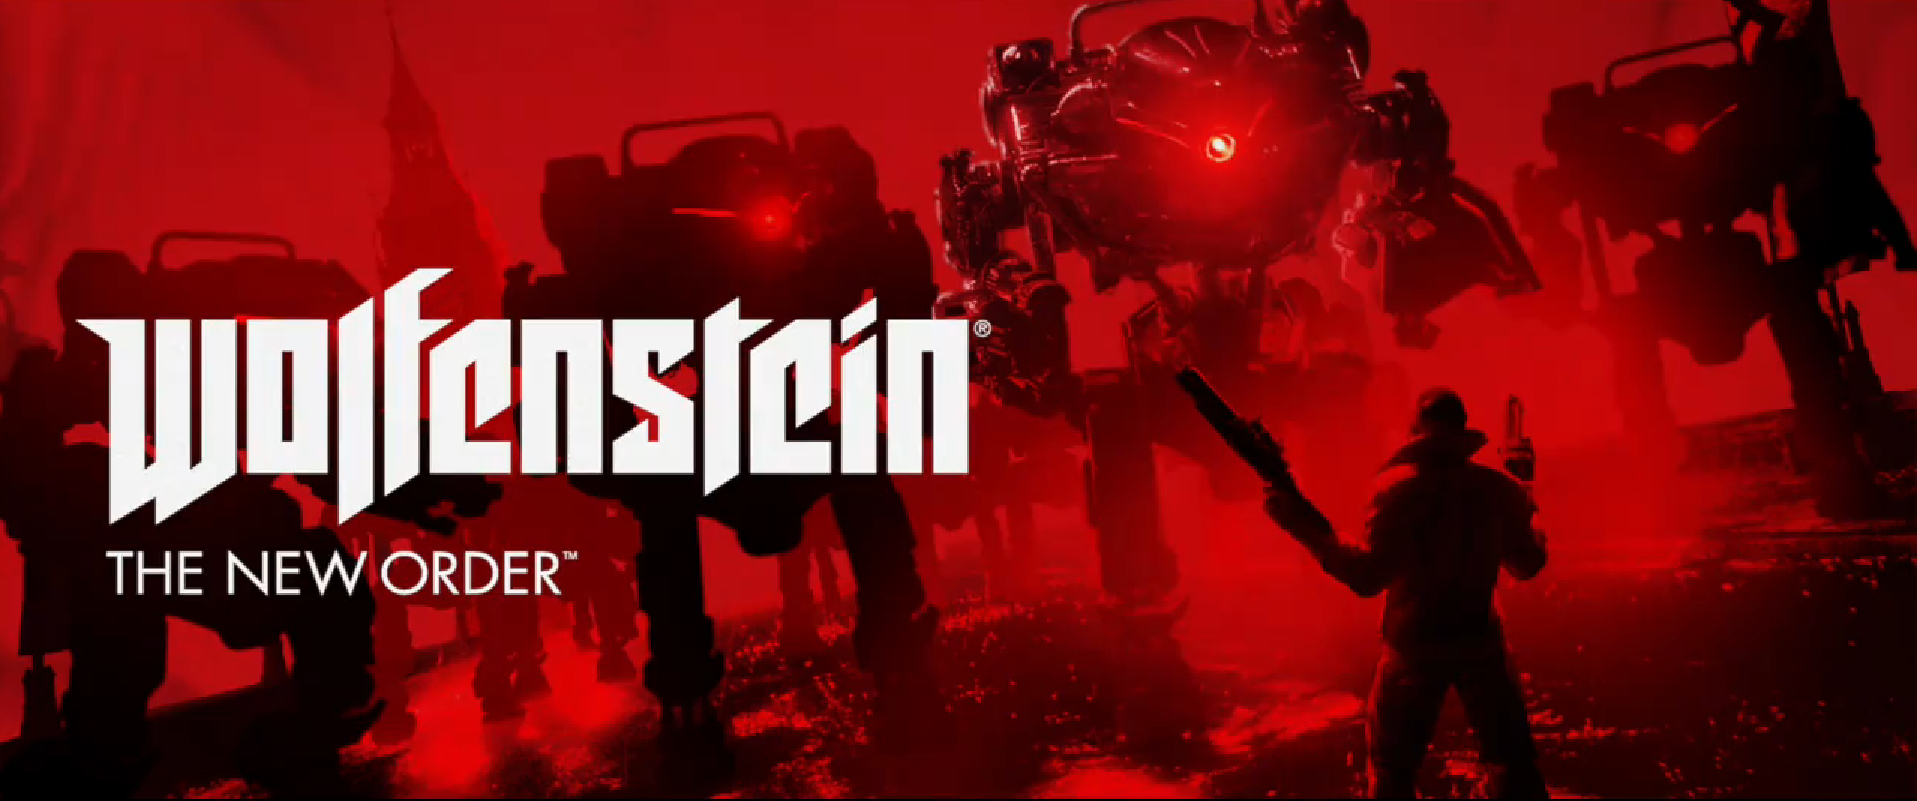 Wolfenstein: The New Order Backgrounds, Compatible - PC, Mobile, Gadgets| 1917x801 px